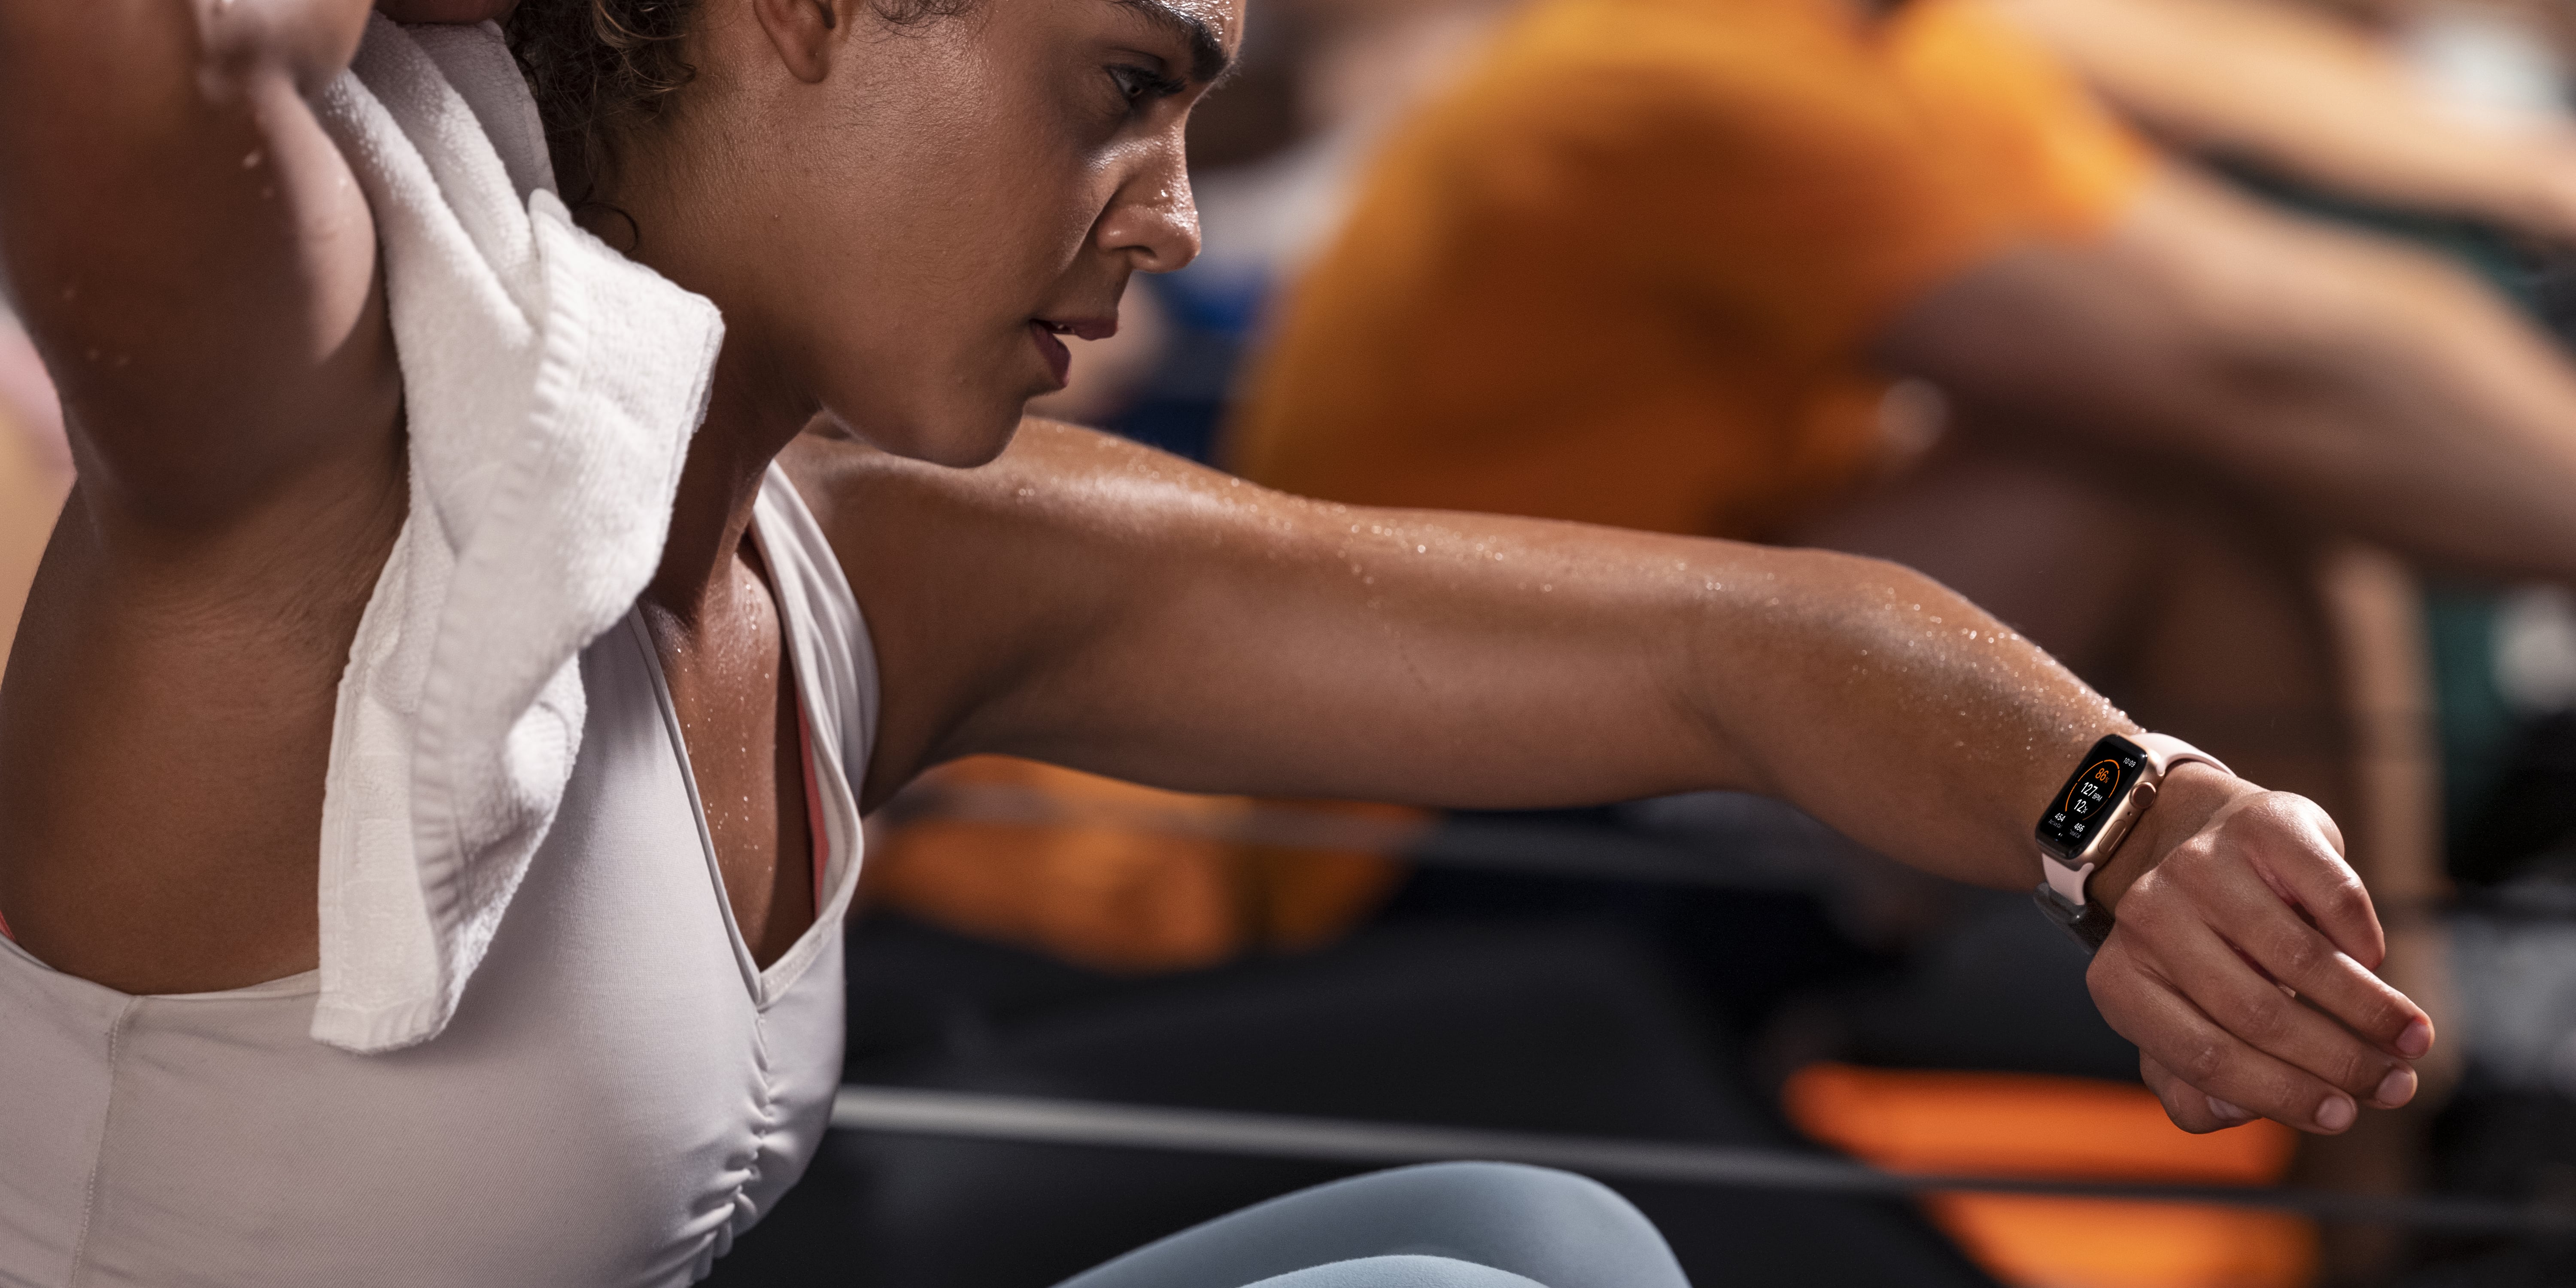 Orangetheory Fitness Mentor - It's here! The OTbeat Link is in